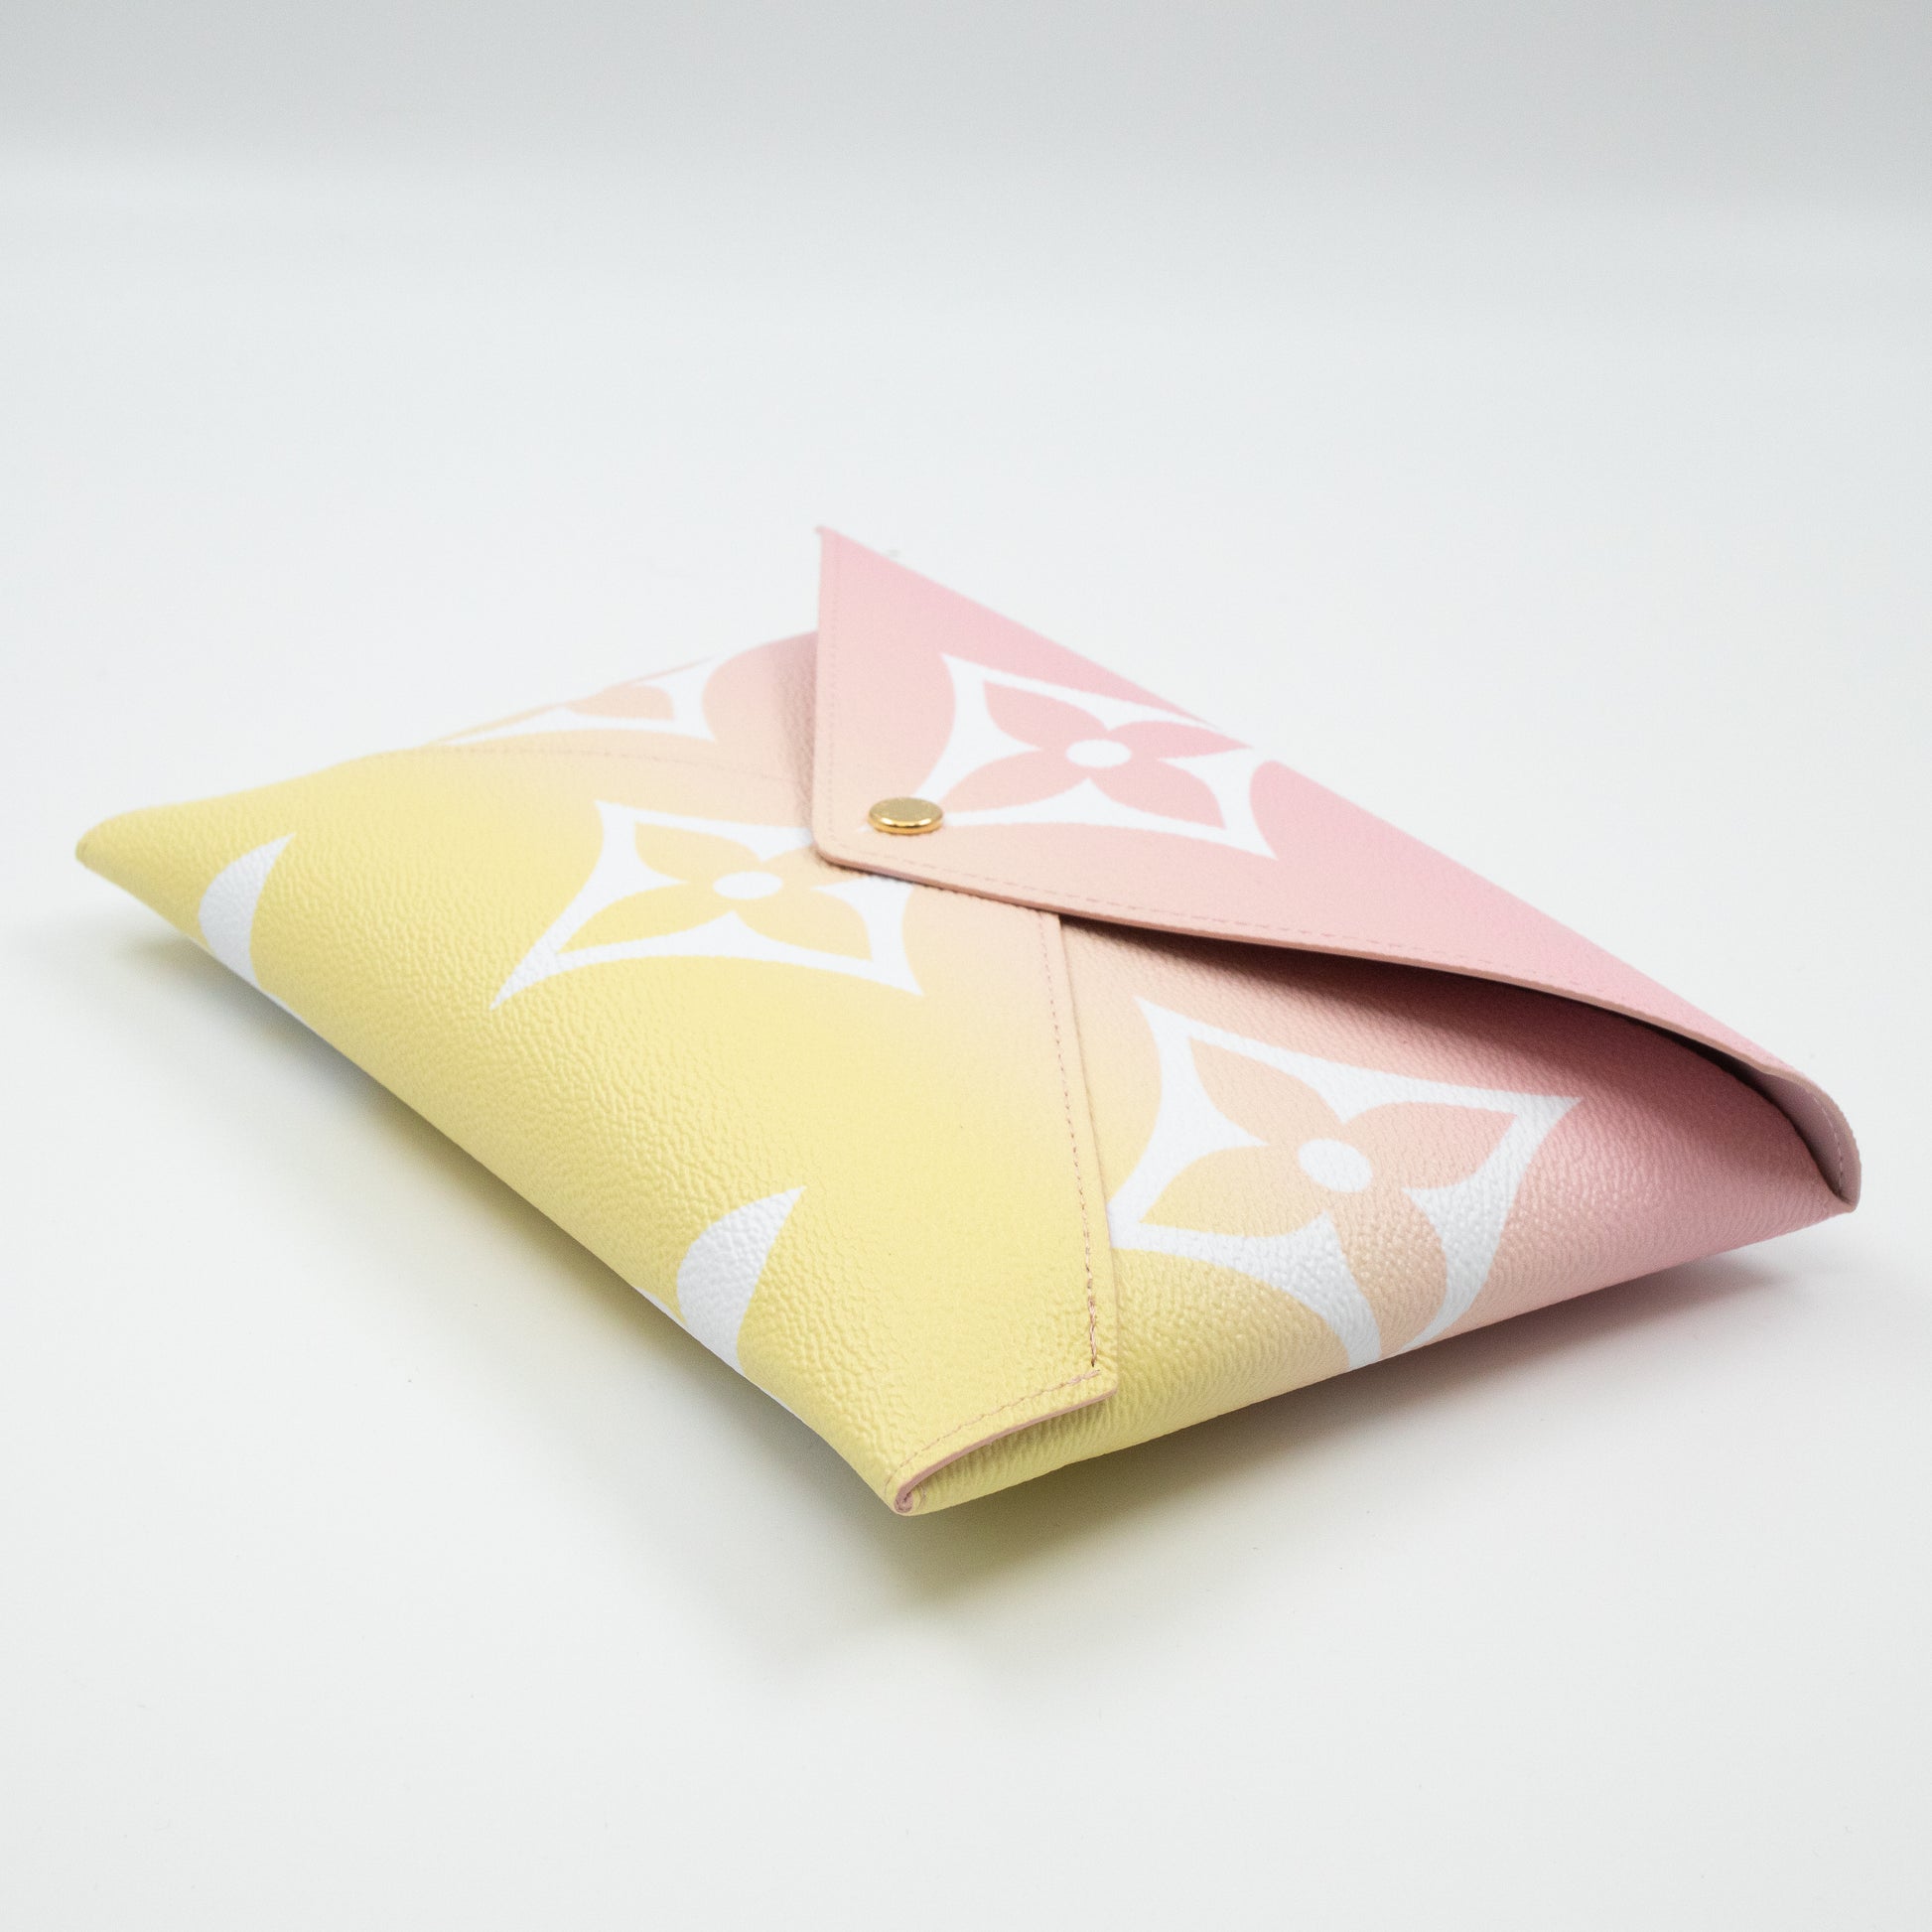 What fun these are! Louis Vuitton By the Pool Kirigami Pochettes